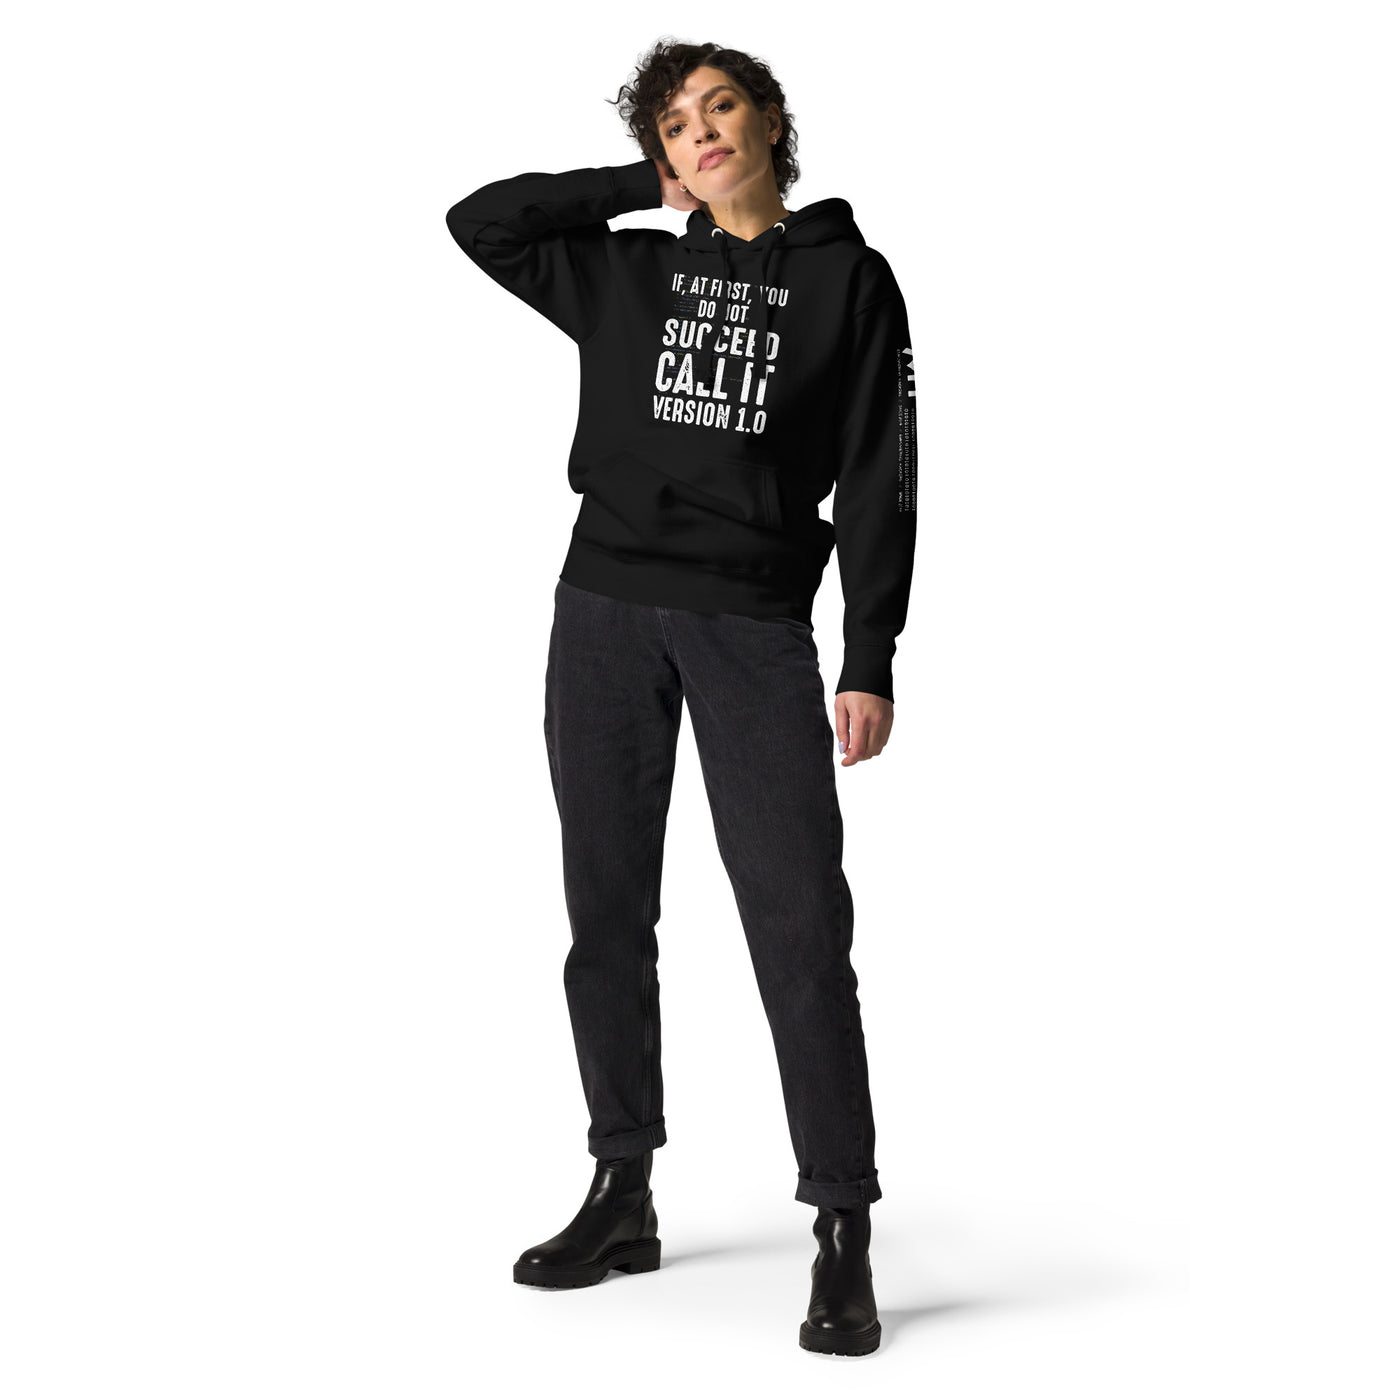 If Not Succeed, Call it Version 1.0 Unisex Hoodie